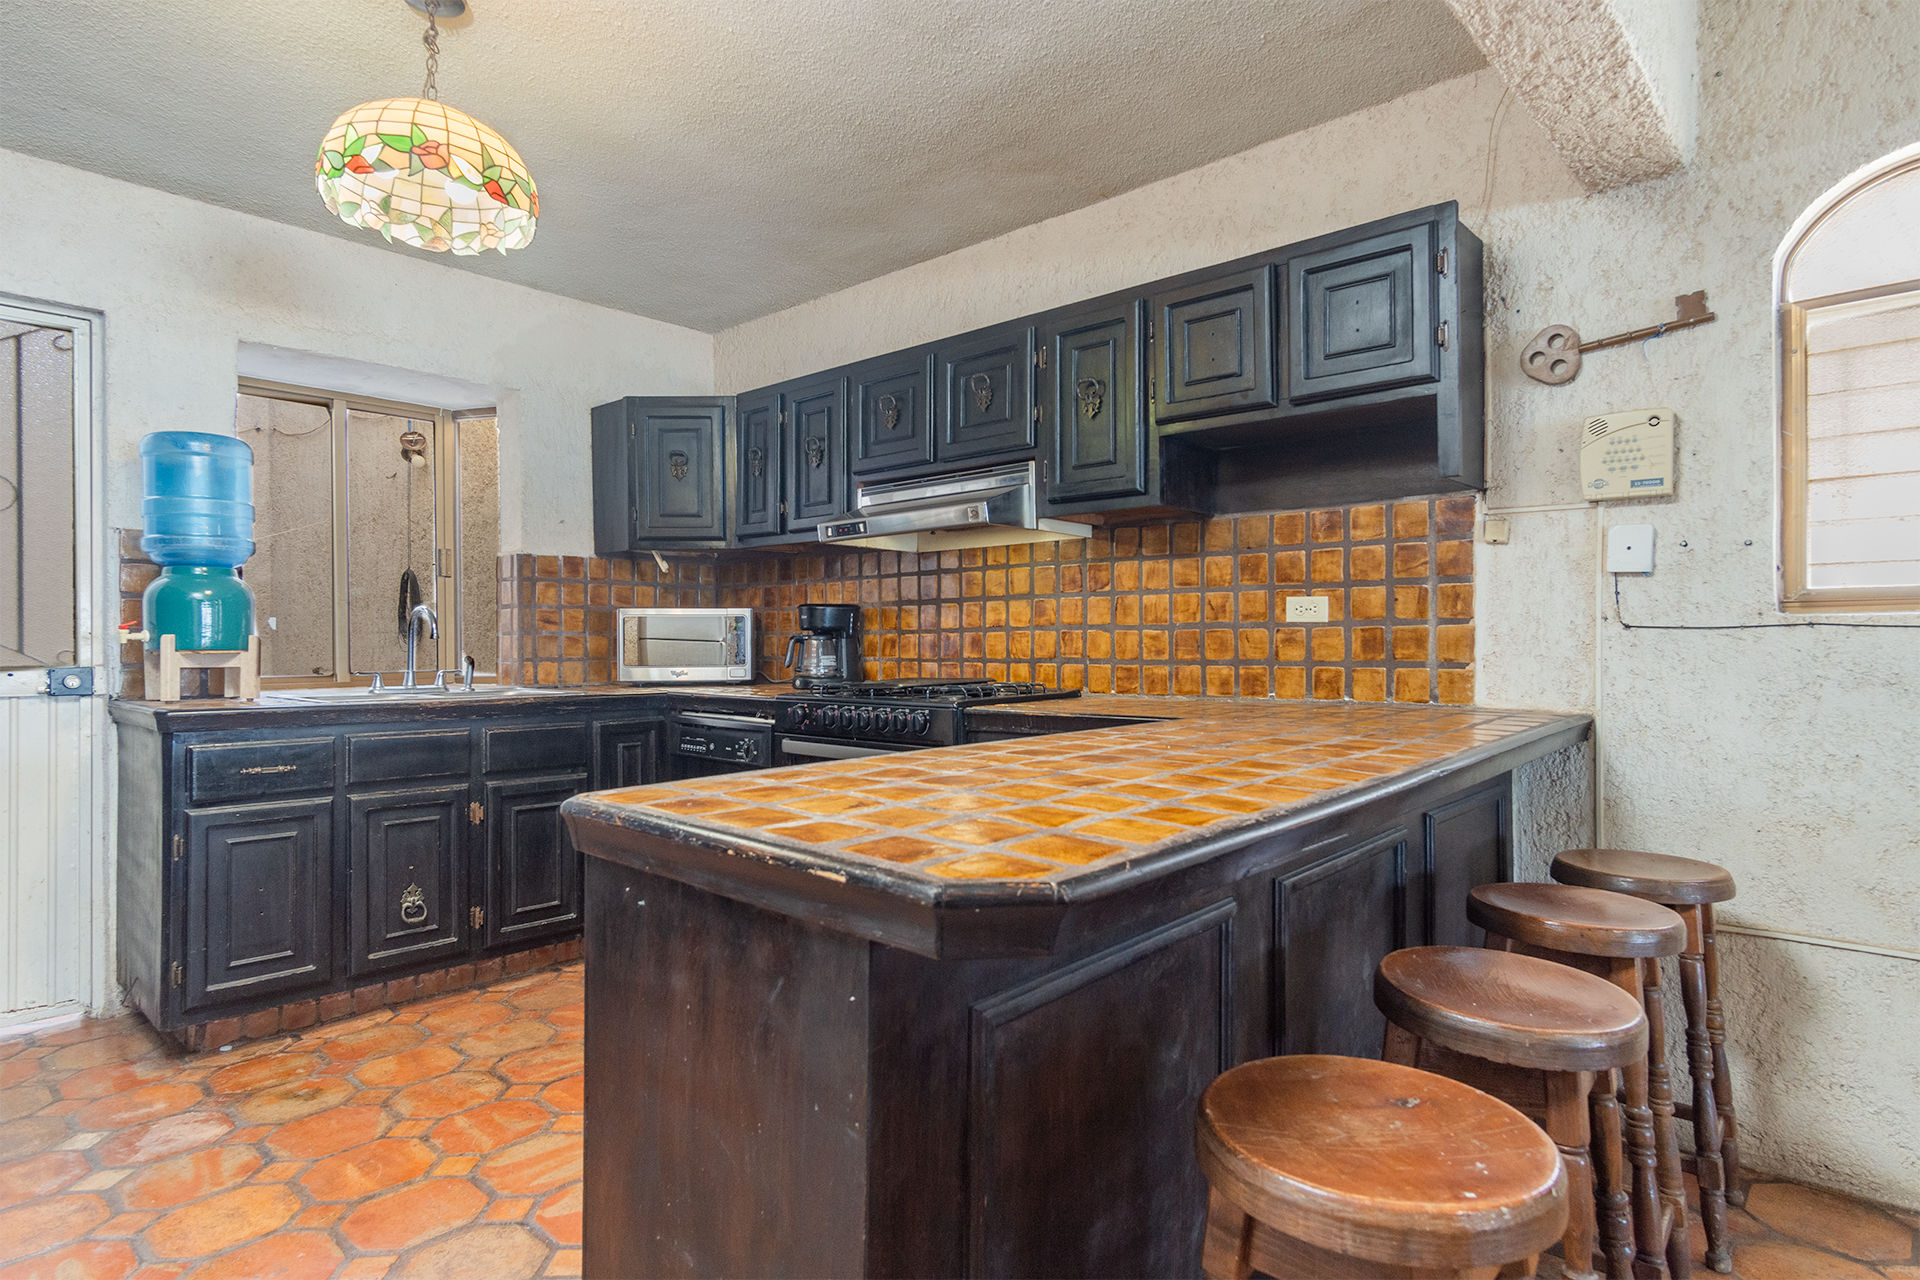 The kitchen has a long counter with stools